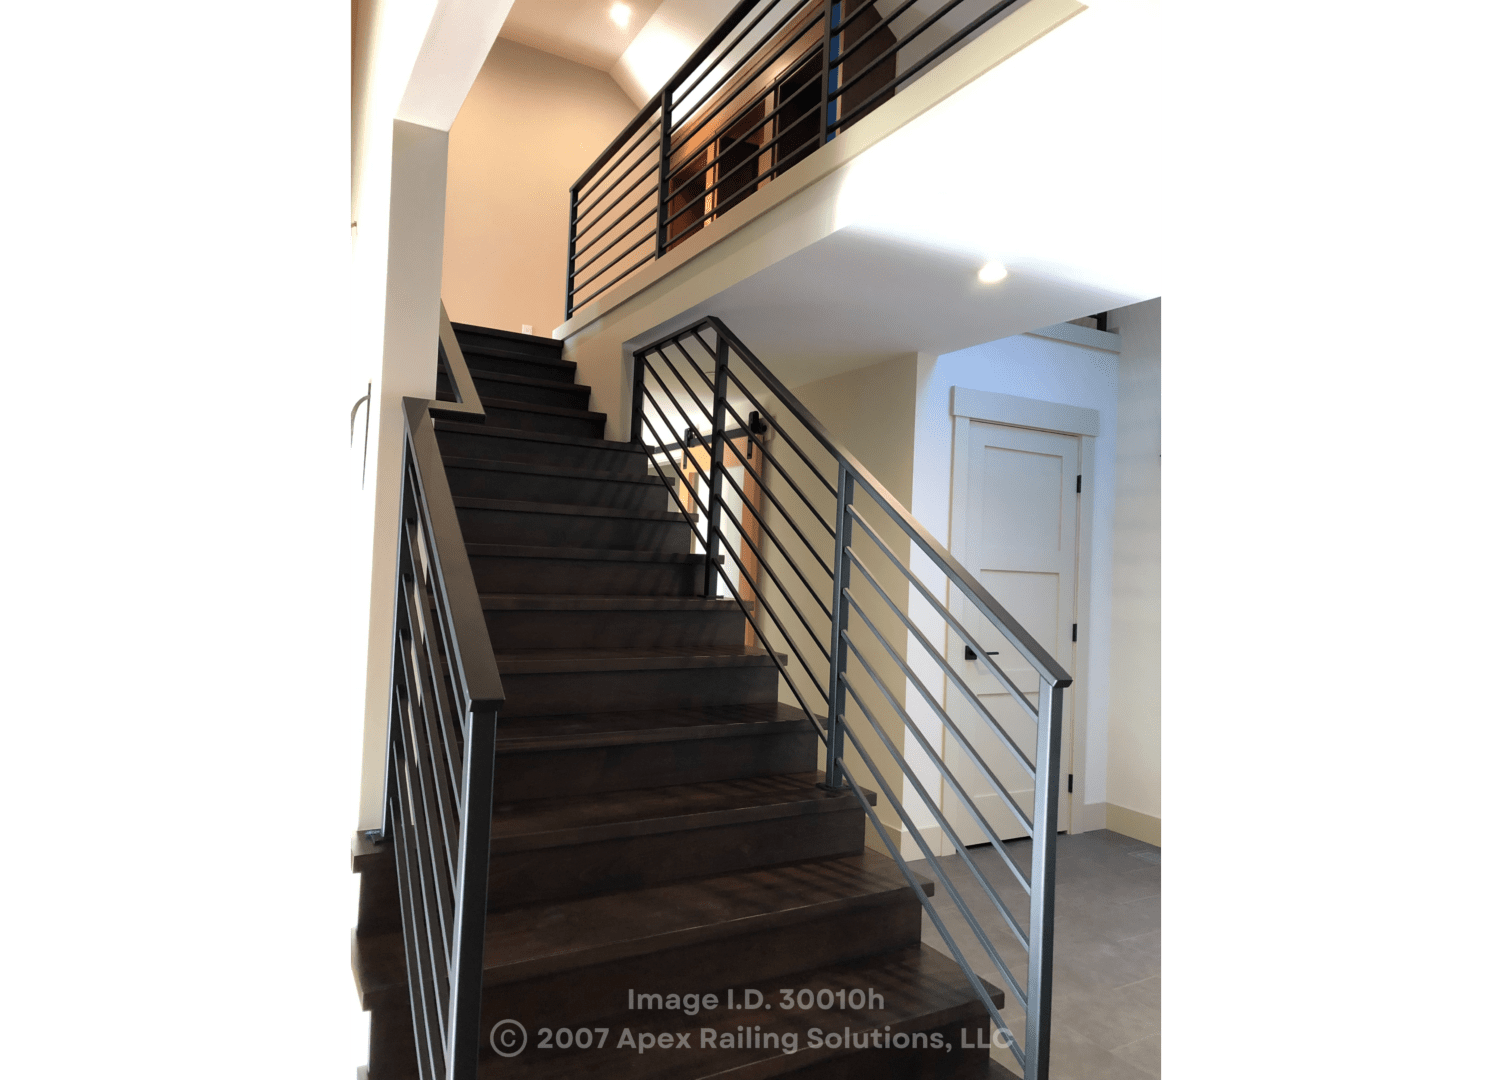 A staircase with handrails